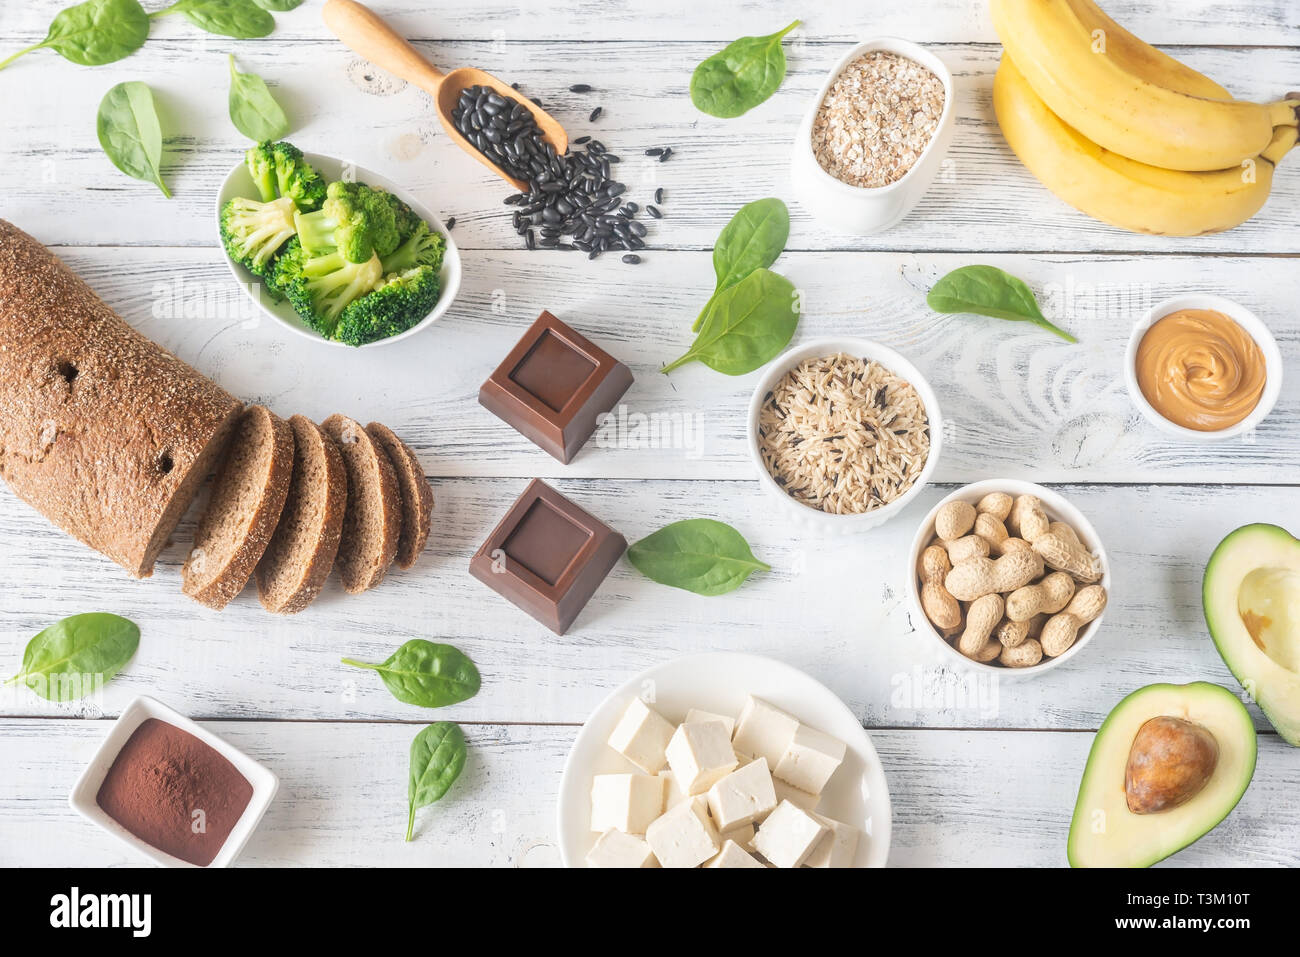 Assortment of magnesium-rich foods on the wooden background Stock Photo